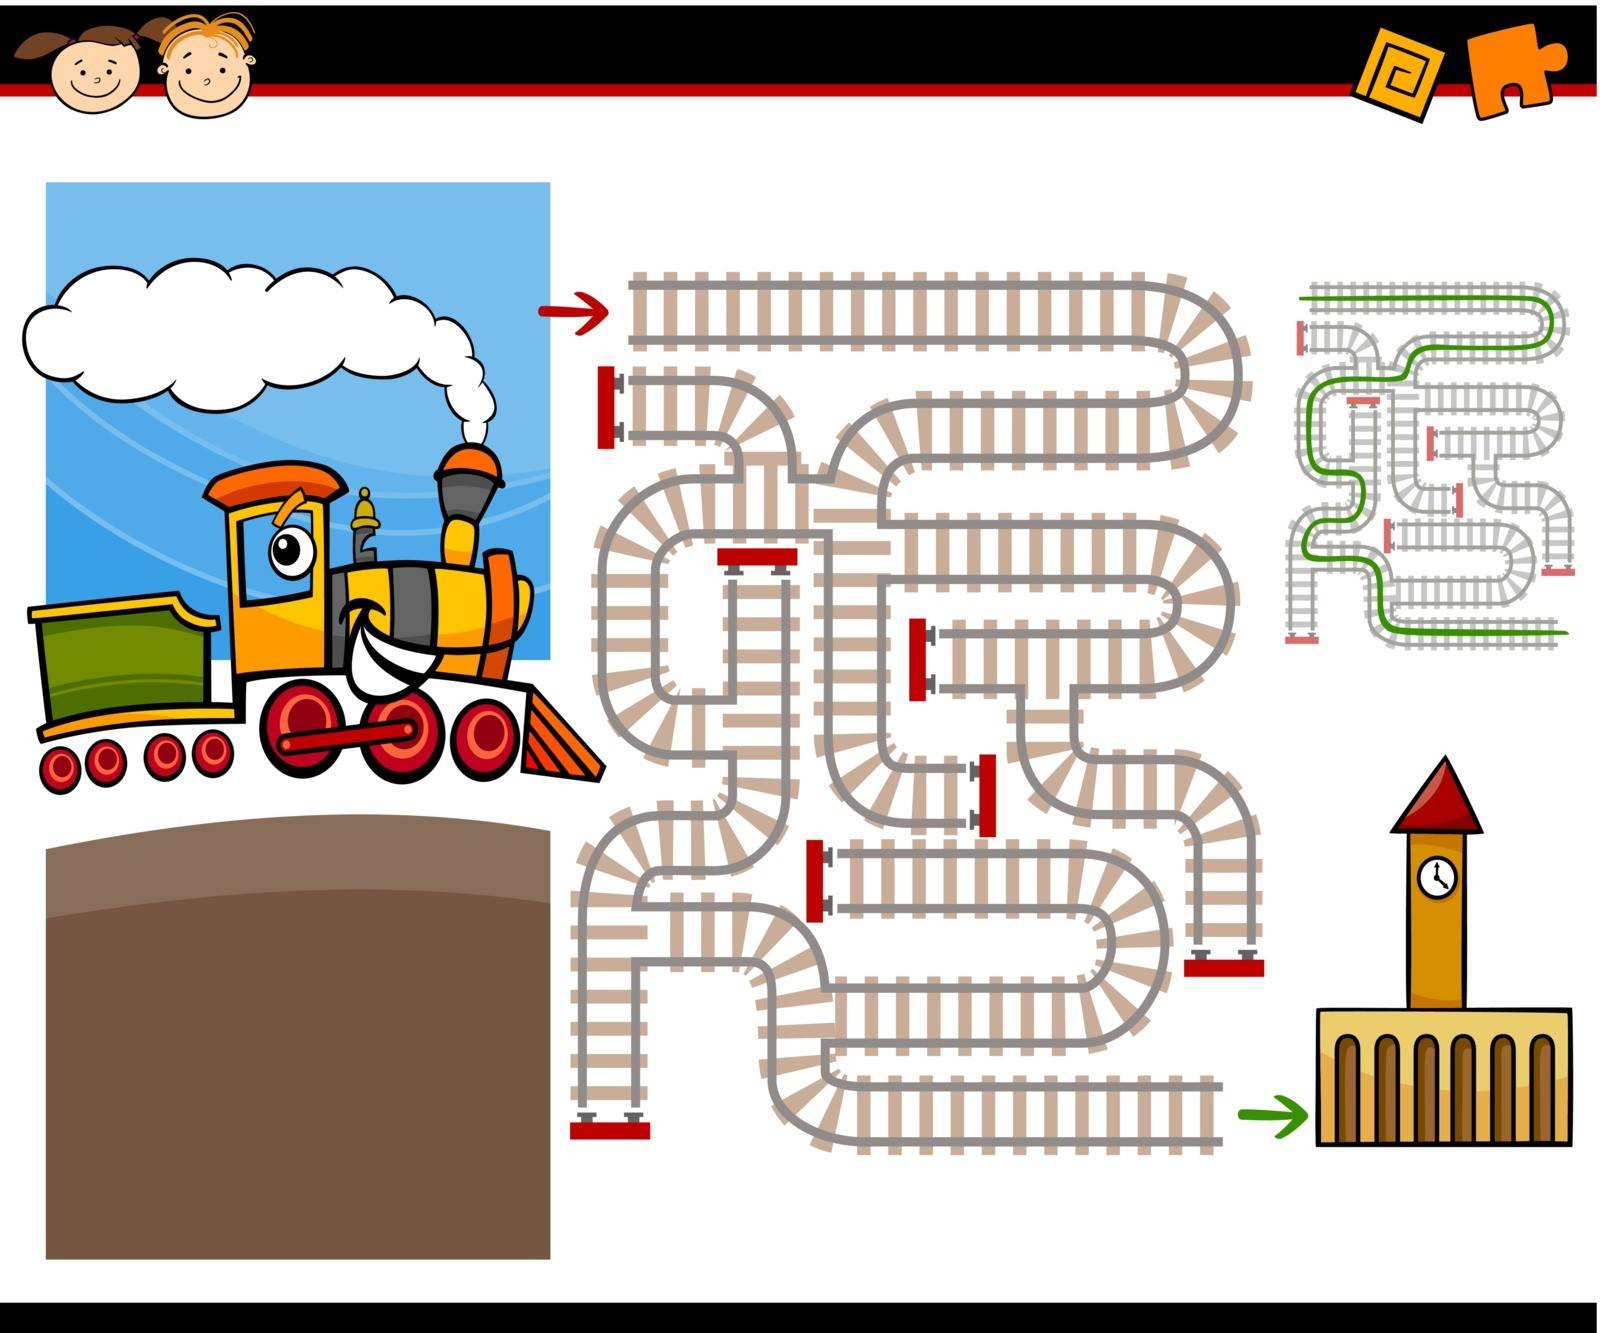 Cartoon Illustration of Education Maze or Labyrinth Game for Preschool Children with Cute Steam Engine Train and Railways